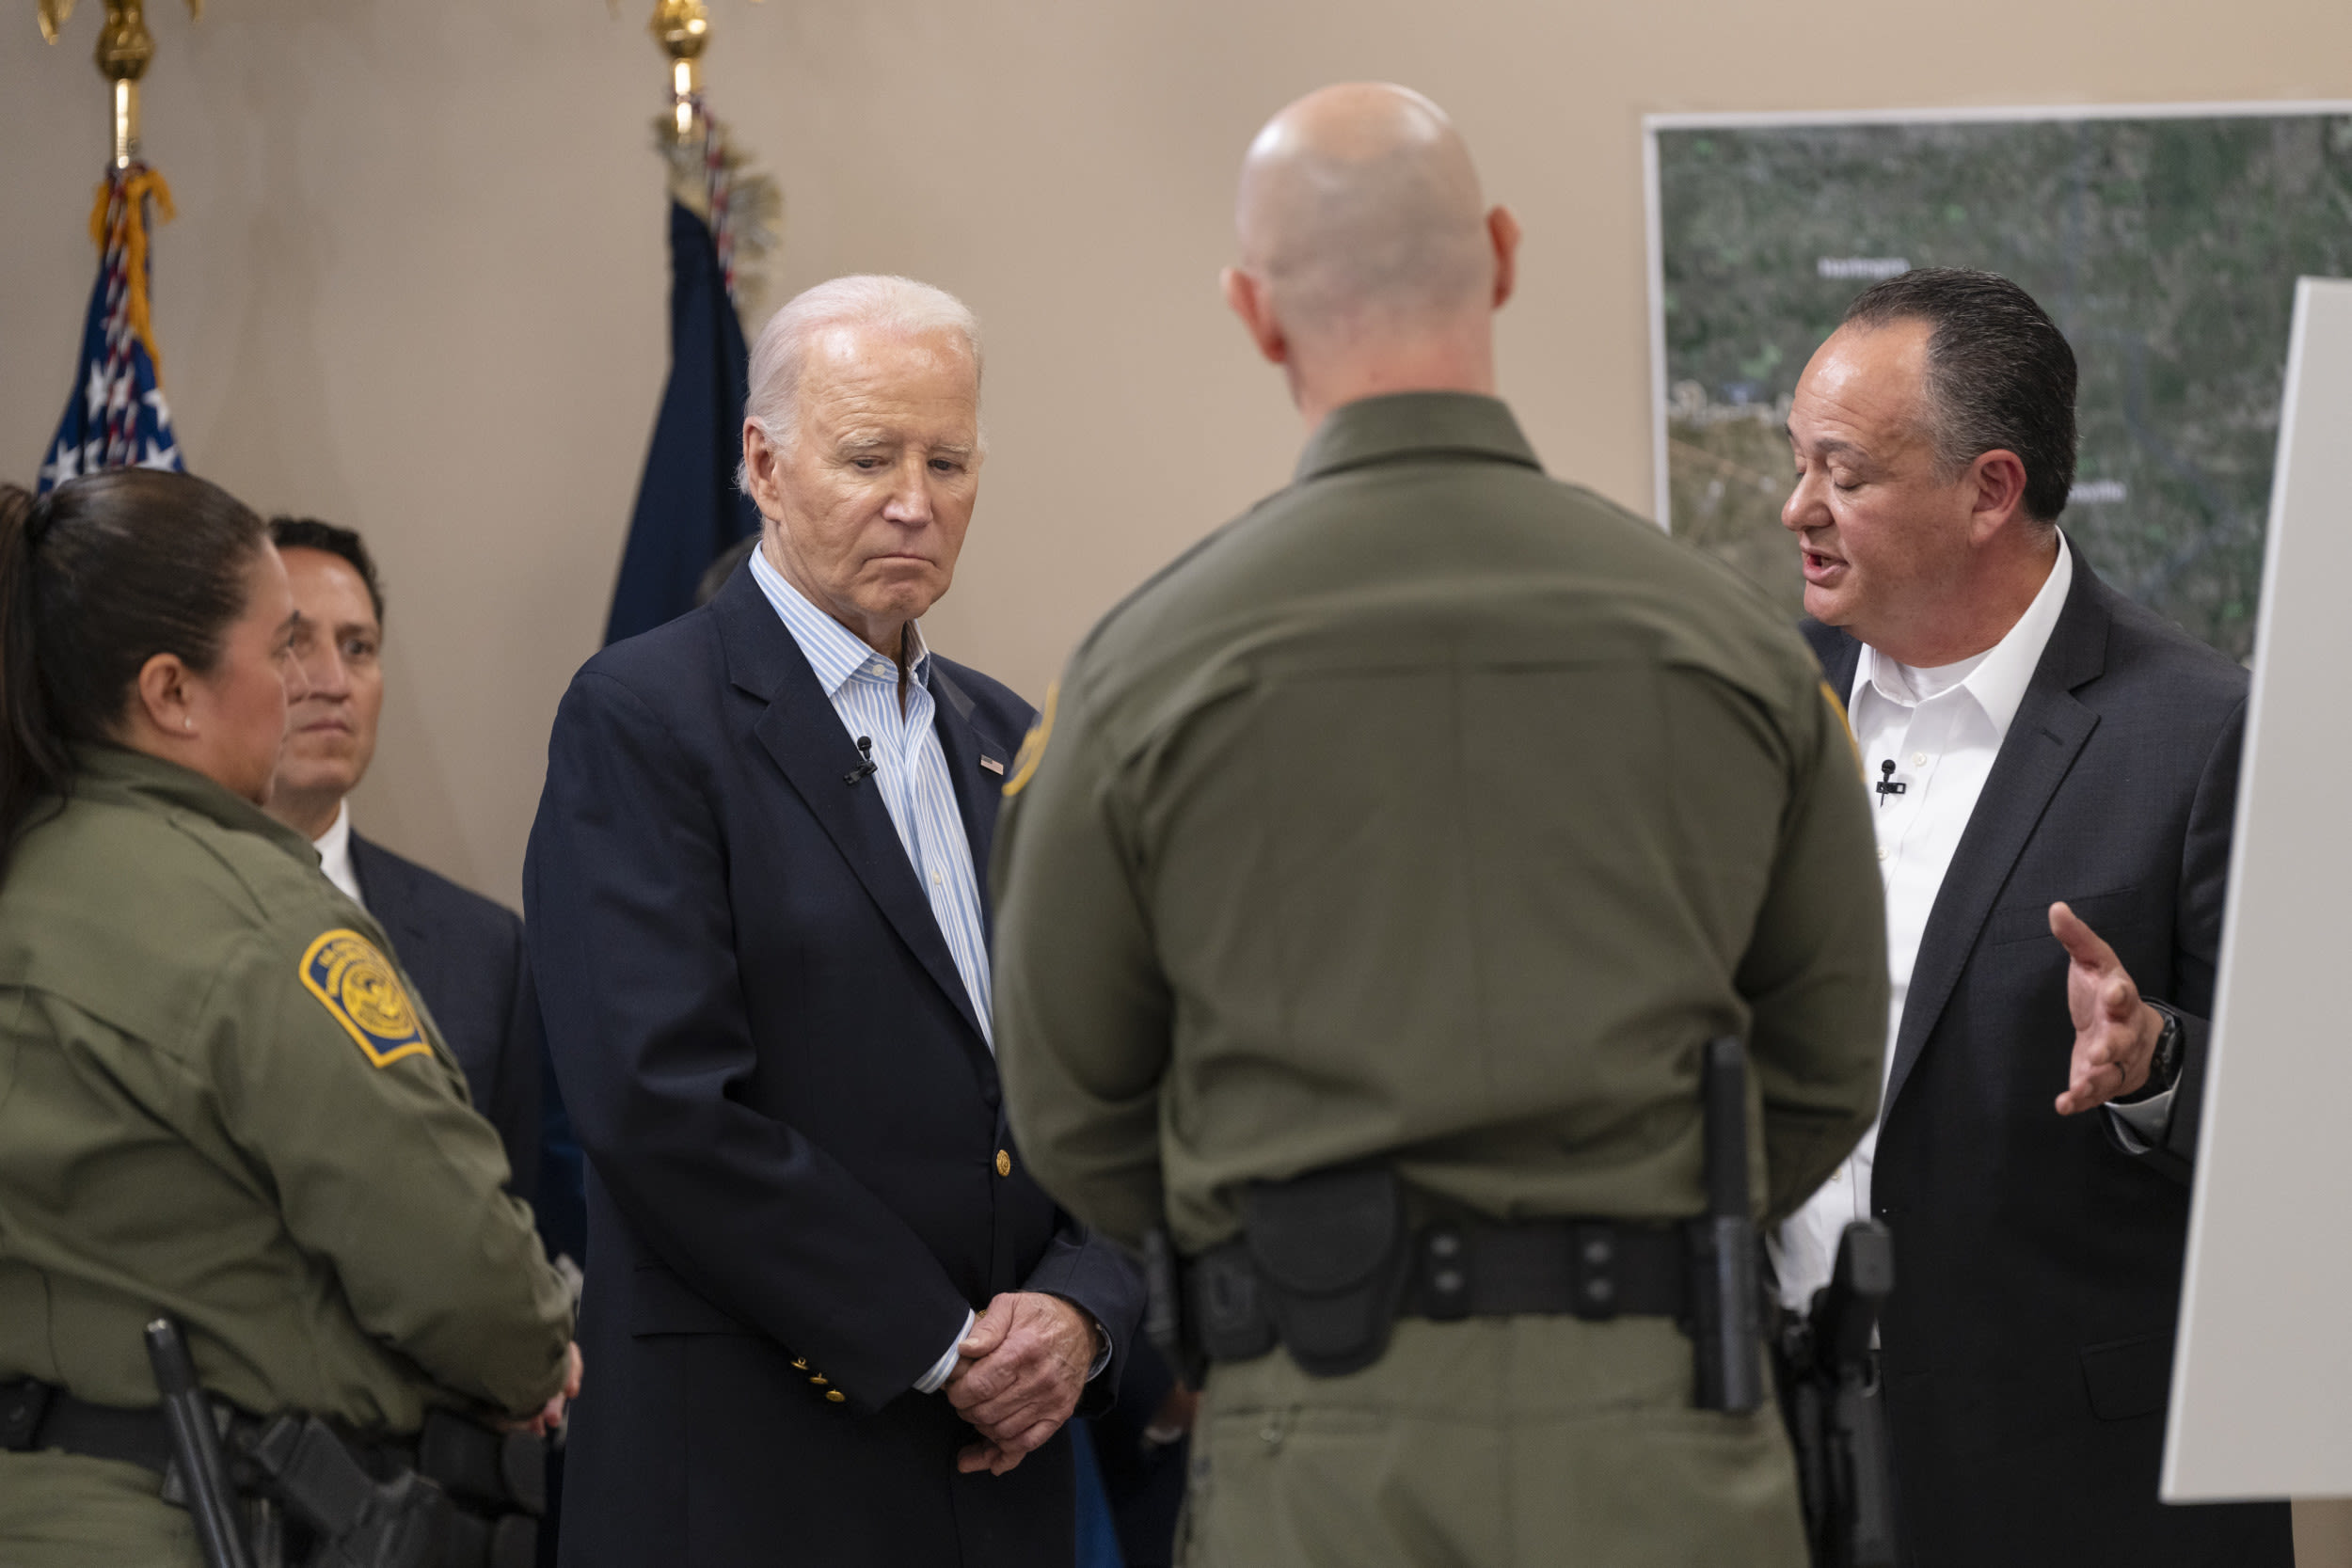 New blow to Biden on immigration